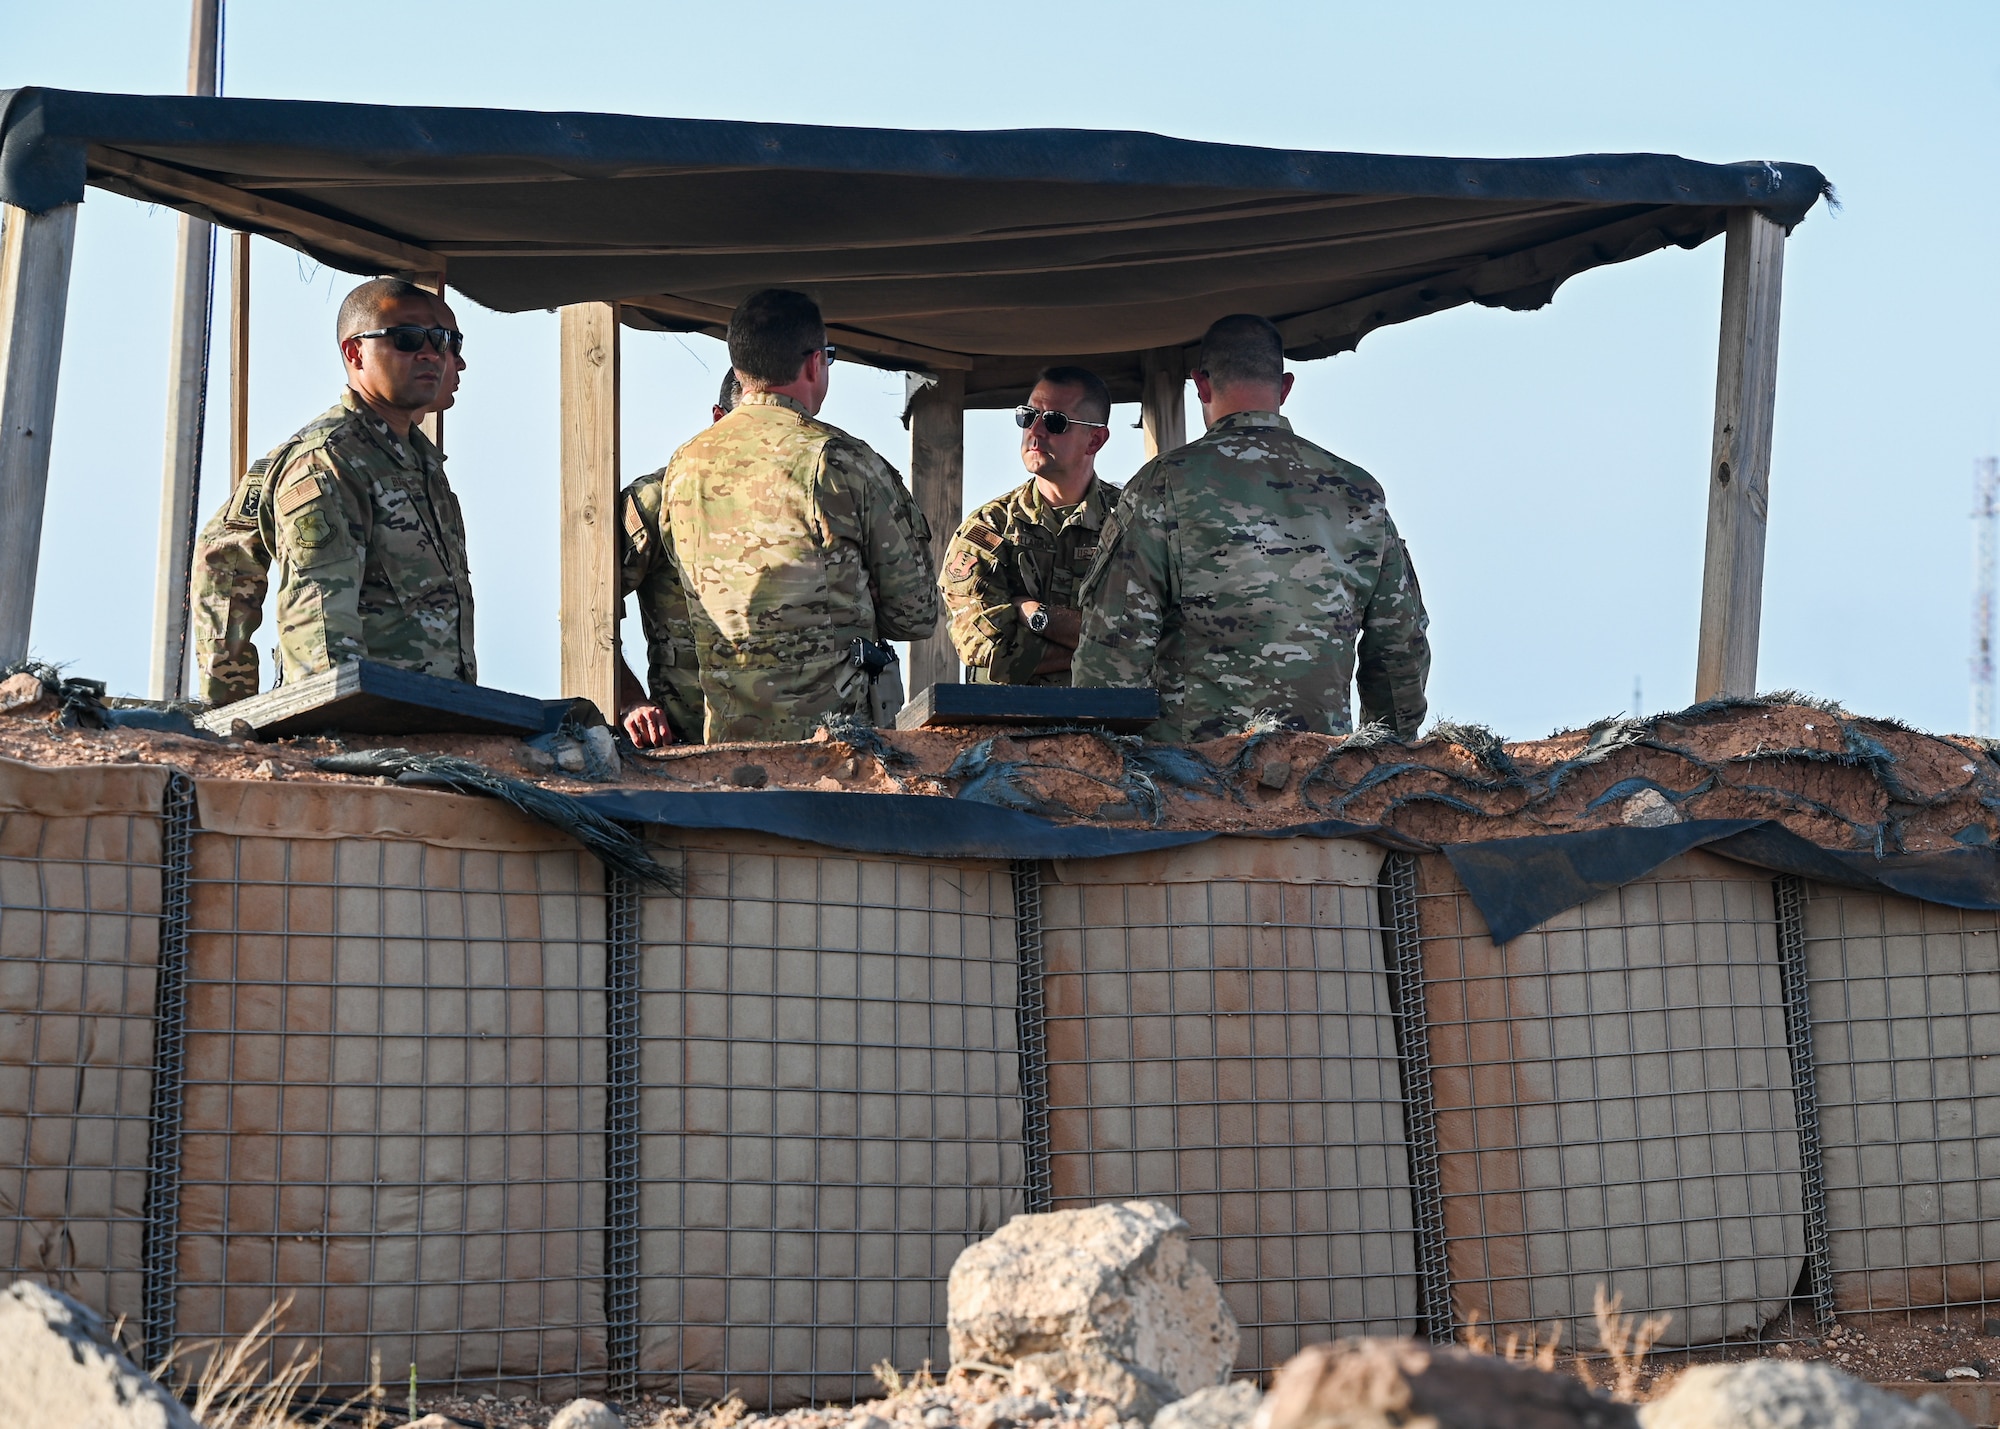 Col. Bryan T. Callahan, 435th Air Expeditionary Wing commander, speaks with leadership from the 776th Expeditionary Air Base Squadron at Chabelley Airfield, Djibouti, July 25, 2021. Callahan received a tour of various units which support the 435th AEW mission at Chabelley Airfield. (U.S. Air Force photo by Airman 1st Class Jan K. Valle)